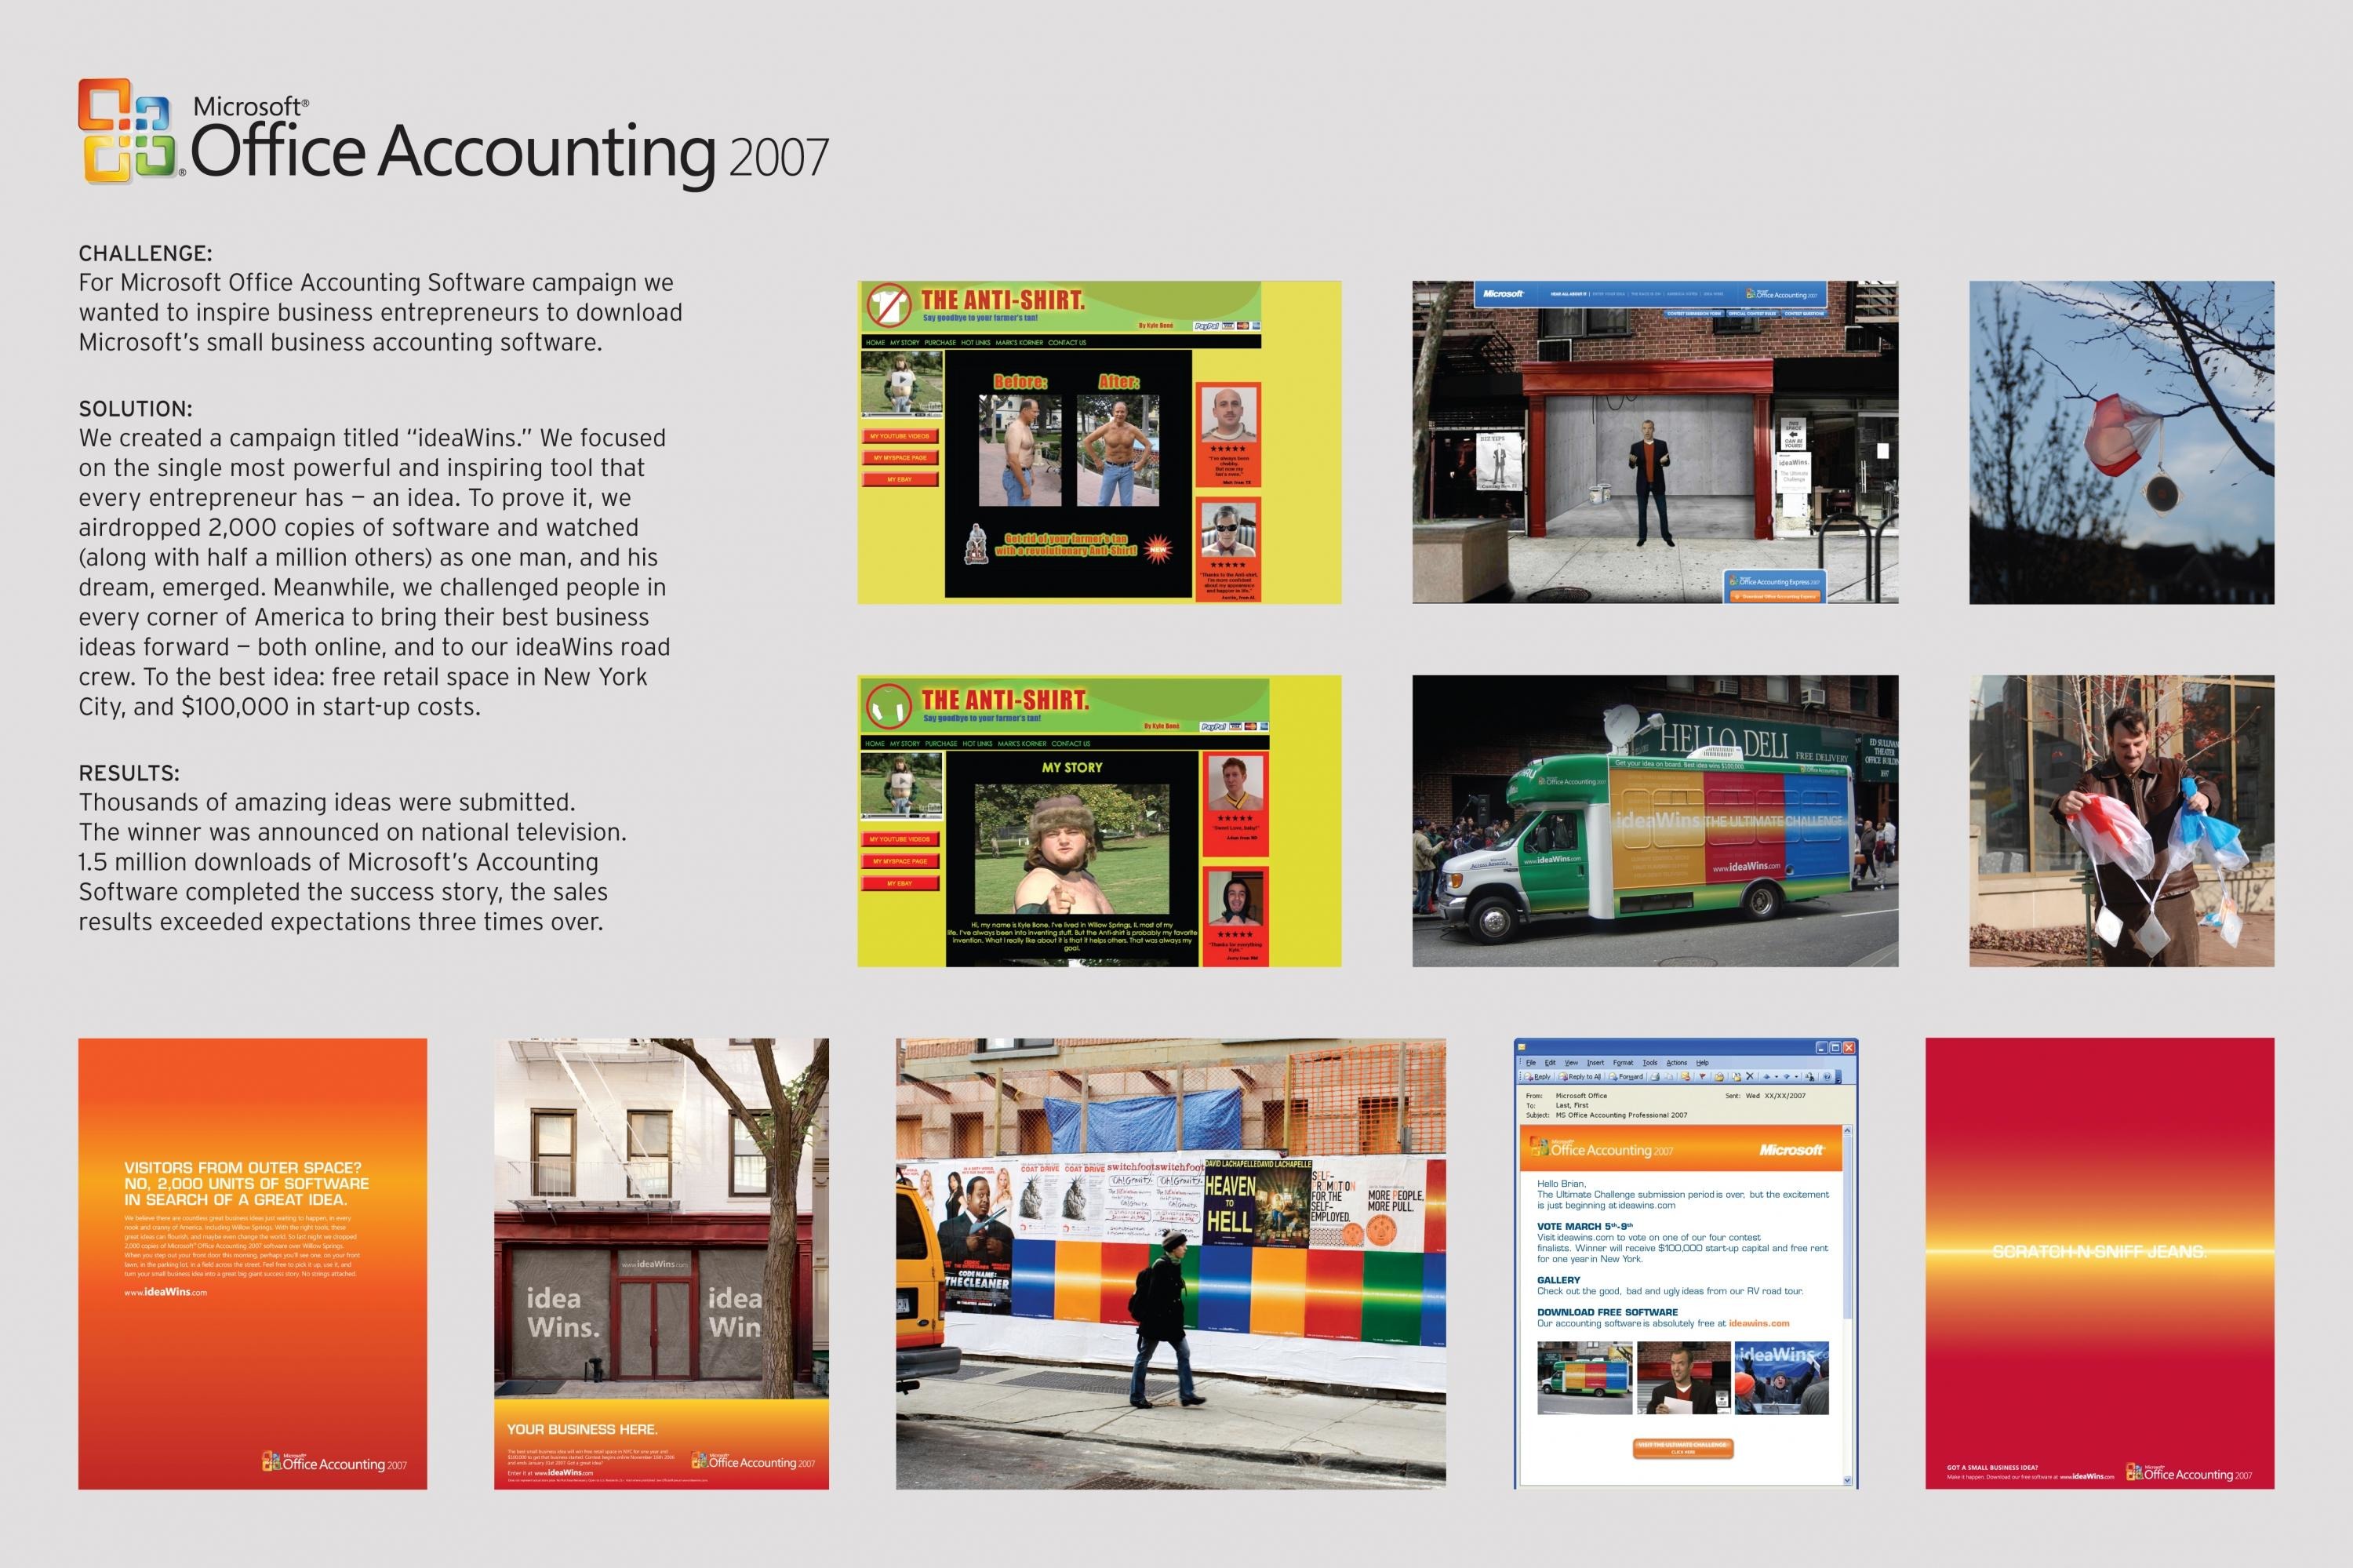 SMALL BUSINESS ACCOUNTING SOFTWARE